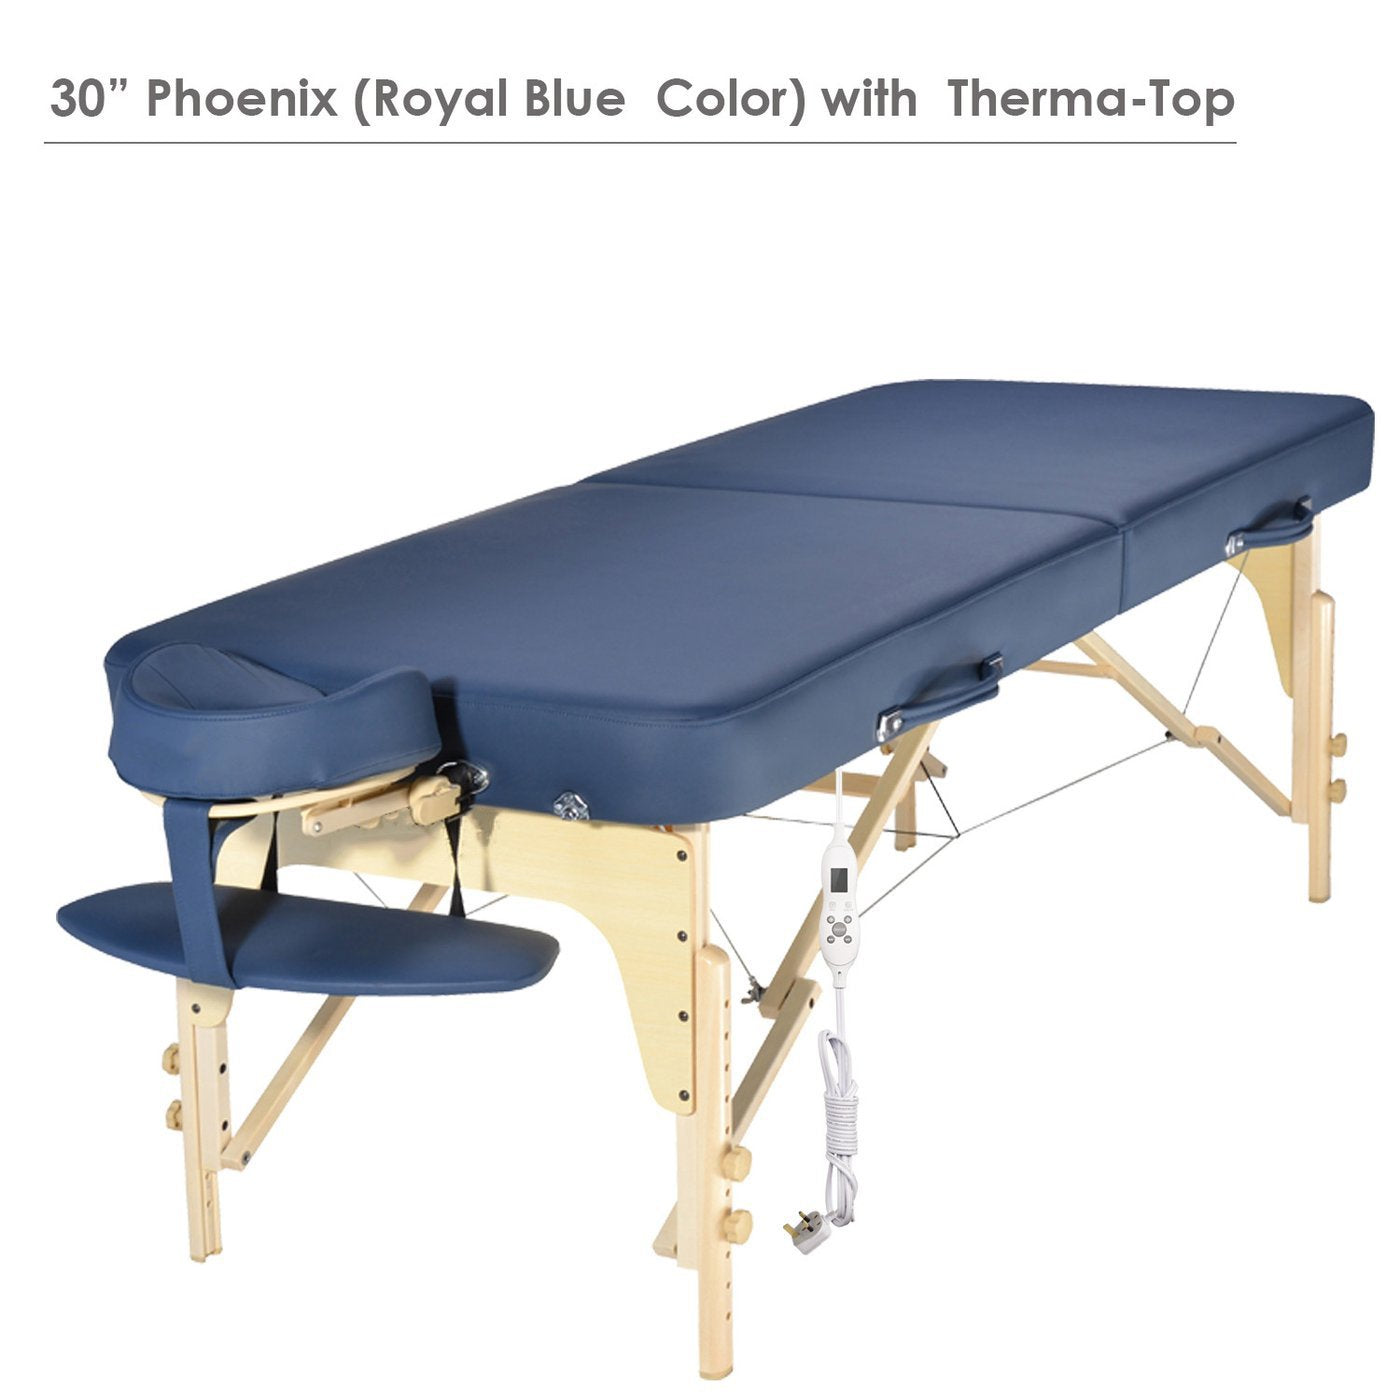 30" Phoenix™ Portable Massage Table Package with Therma-Top® - Adjustable Heating system